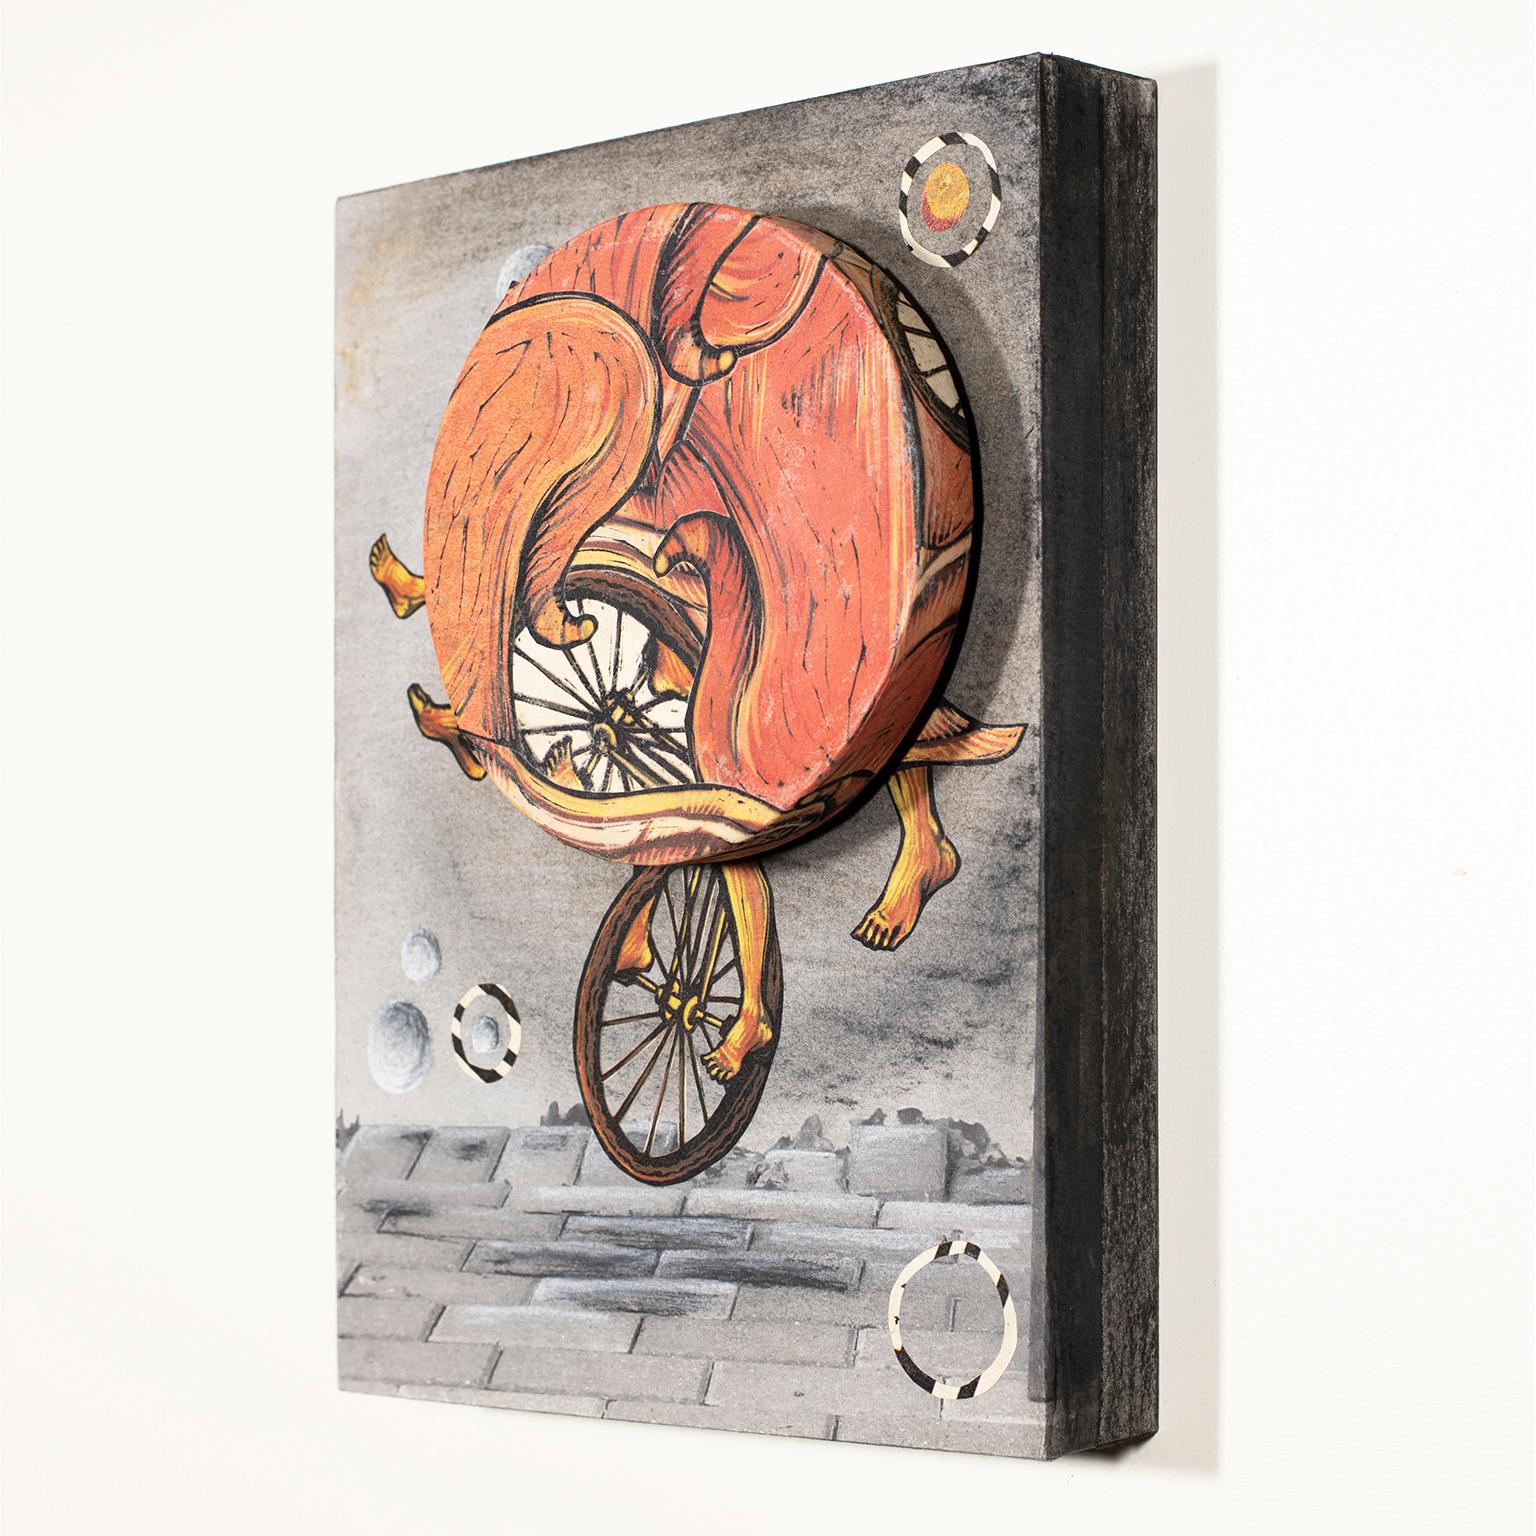 Try Not to Fall, Just Go II, by Courtney Nicole Googe, 2018
Oil-based ink, inkjet, charcoal, Lokta paper, Masa paper, bookboard, glue, plastic, metal, ball-bearings, wood panel
9 x 12.25 x 2.75 inch. Original.

Courtney Nicole's Spin showcases a